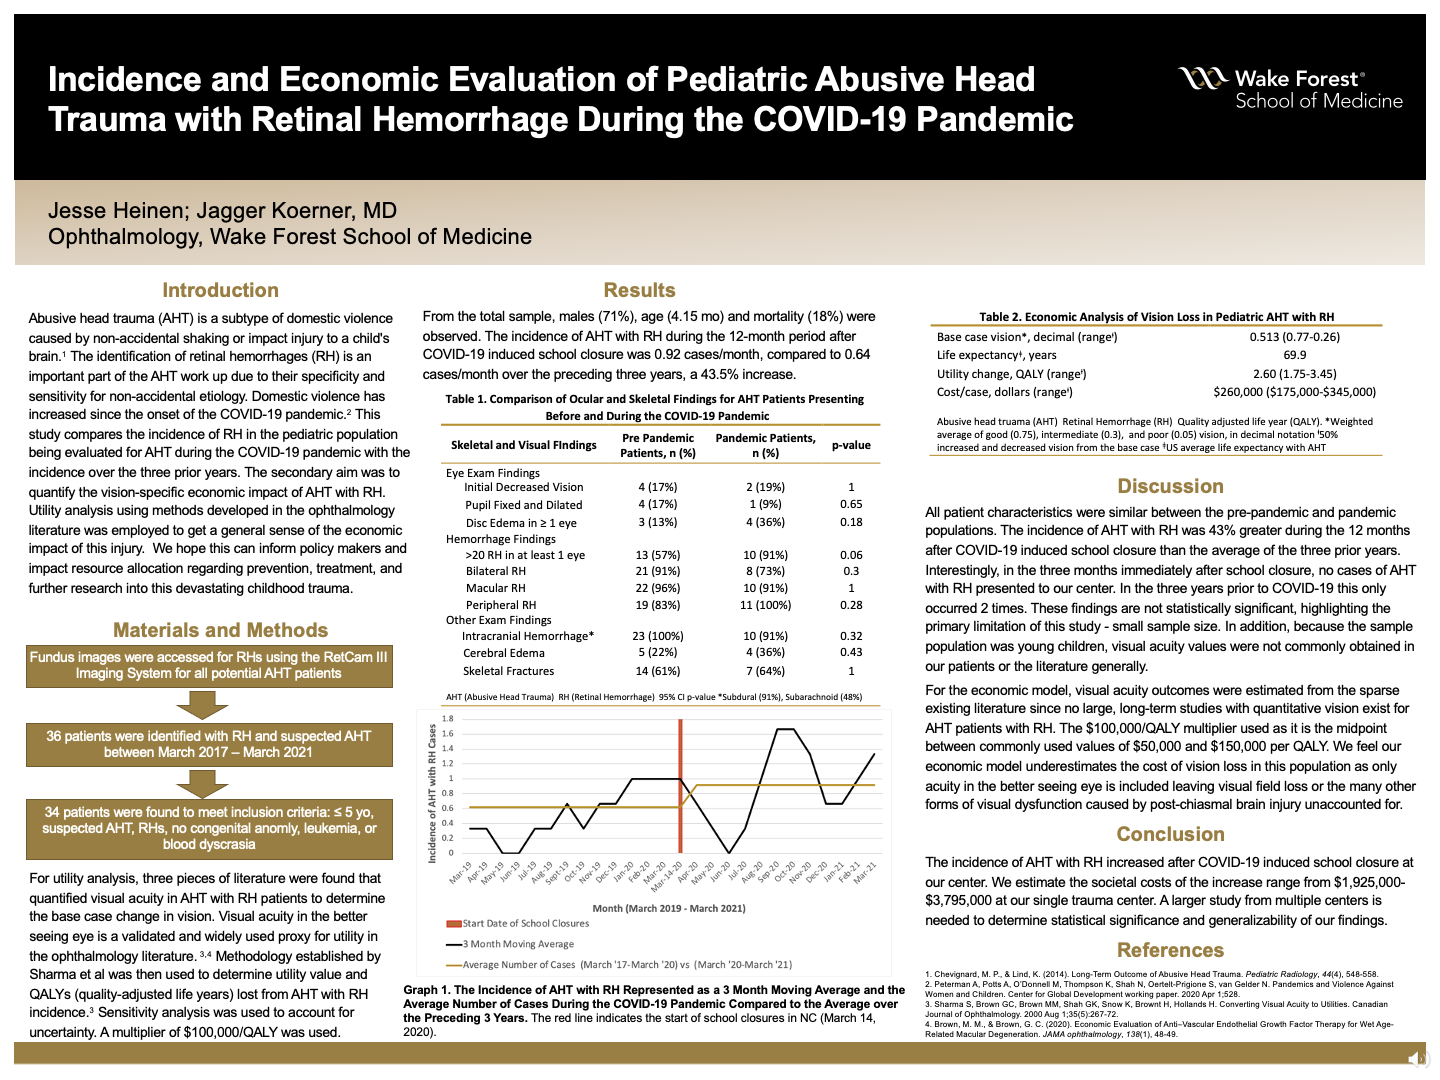 Showcase Image for Incidence and Economic Evaluation of Pediatric Abusive Head Trauma with Retinal Hemorrhage During the COVID-19 Pandemic